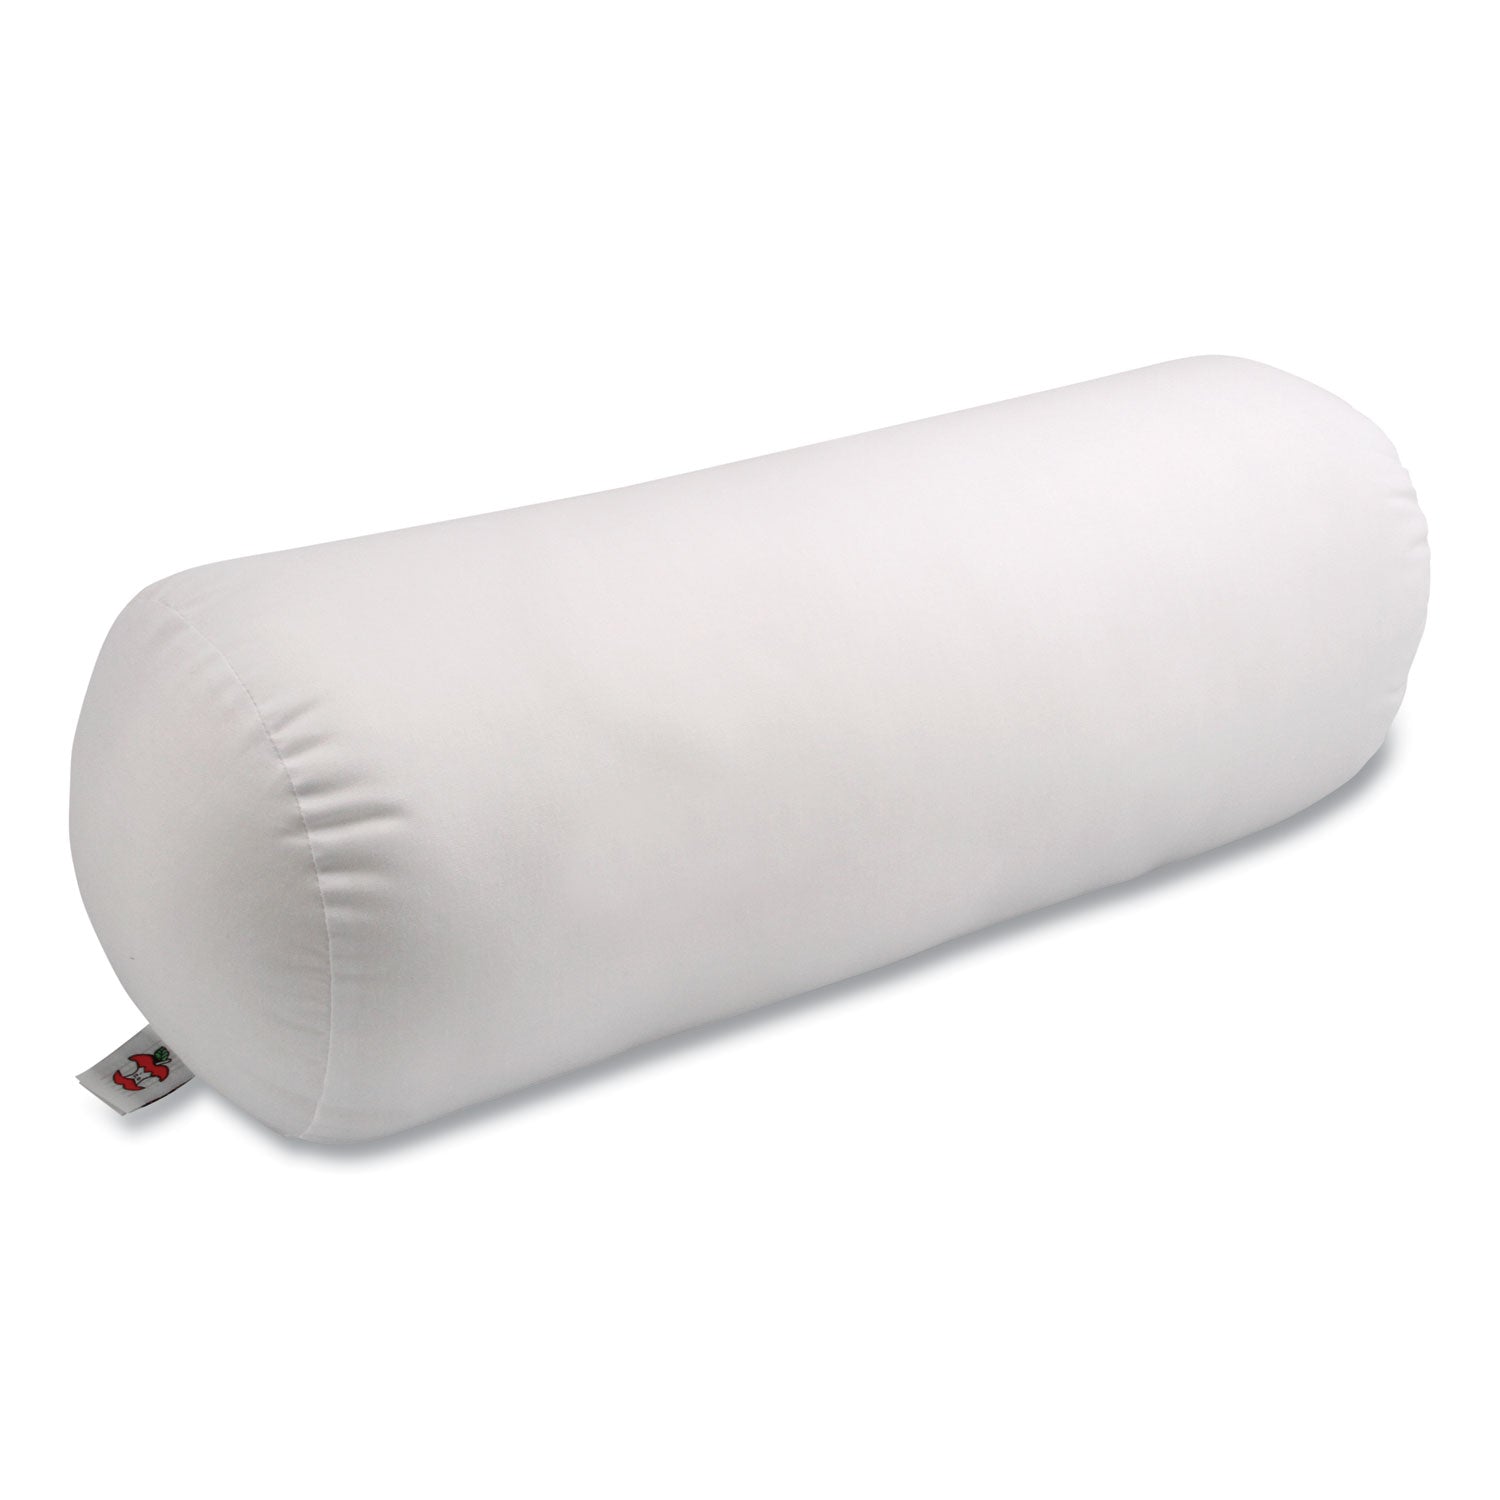 core-jackson-roll-positioning-support-pillow-standard-17-x-7-x-17-white_coerol300 - 1